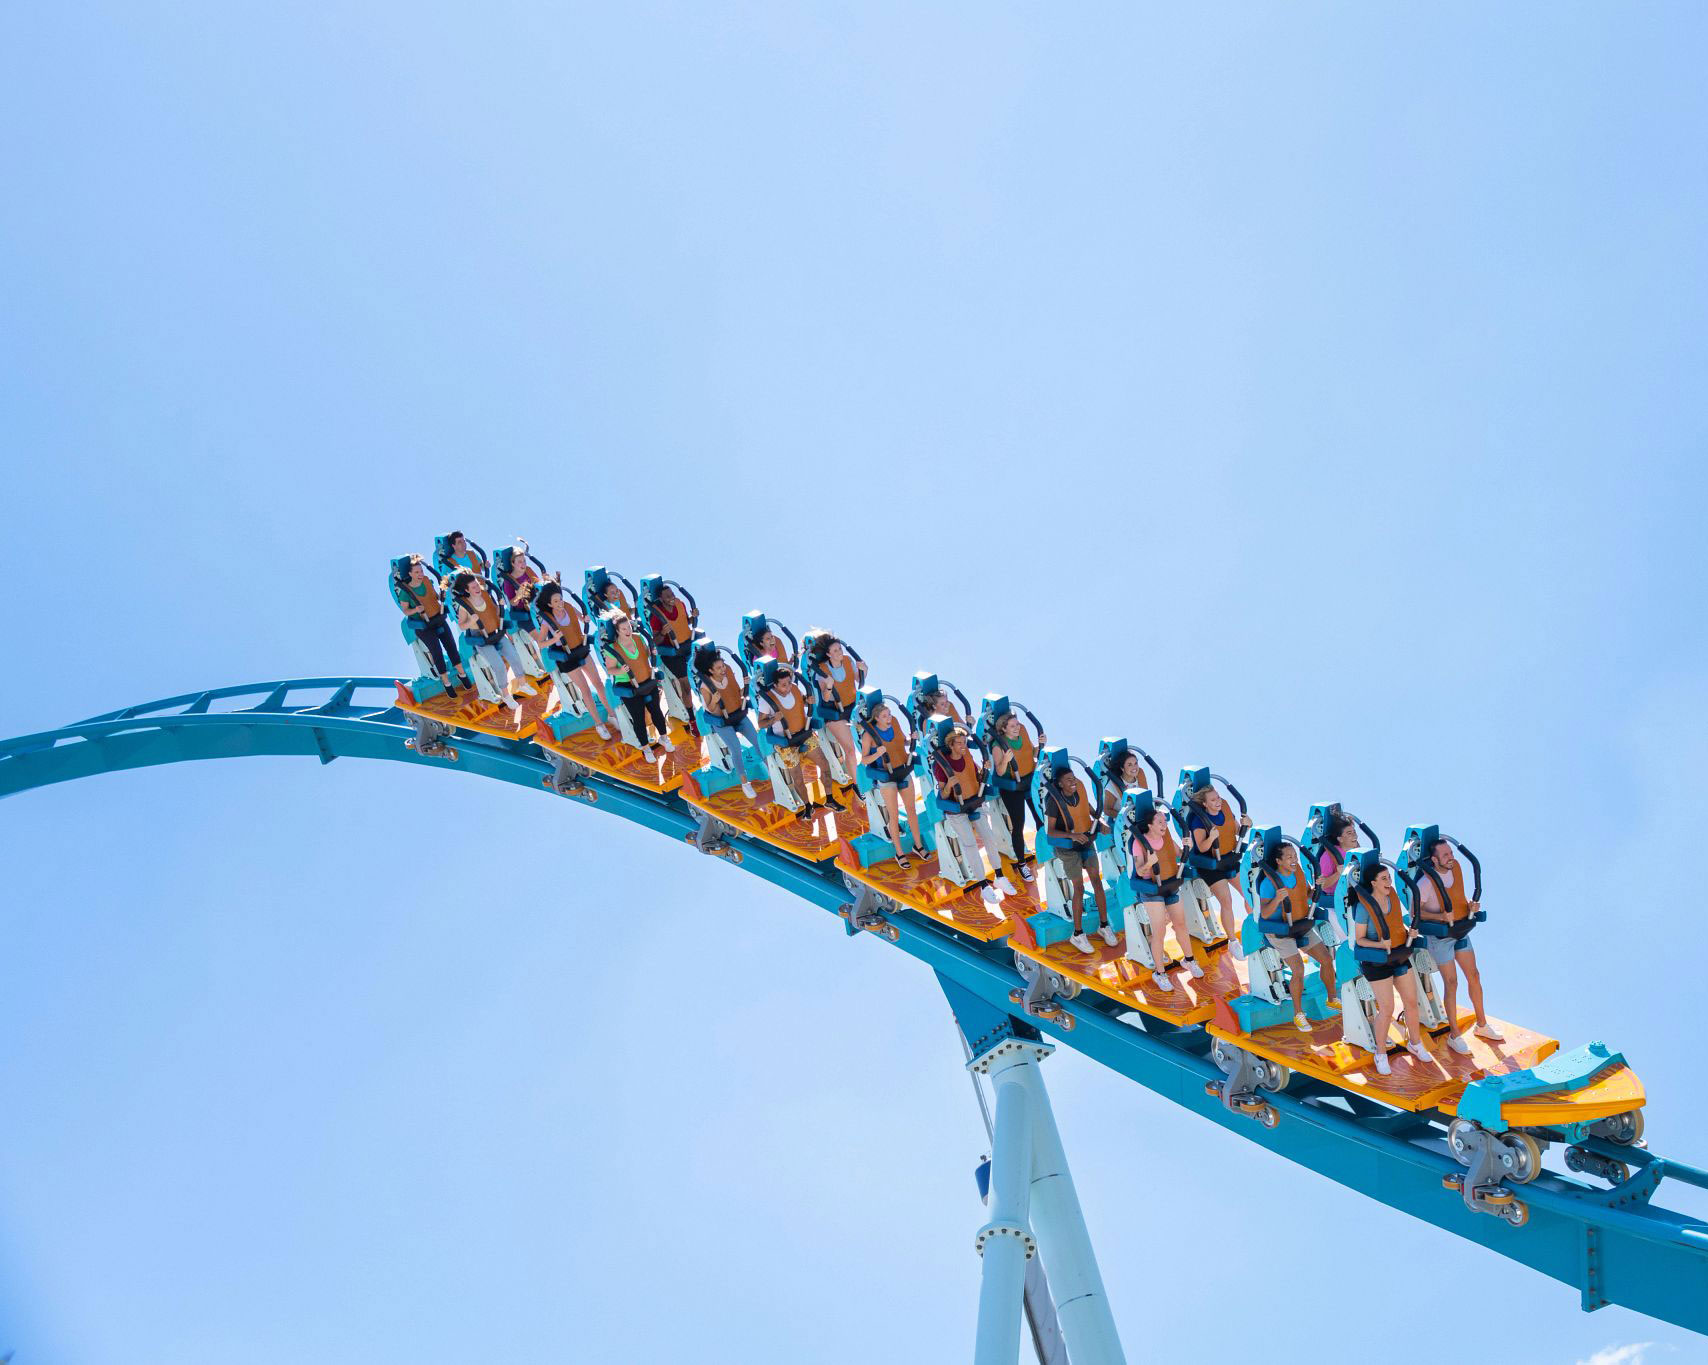 60 things to do in Orlando besides the theme parks